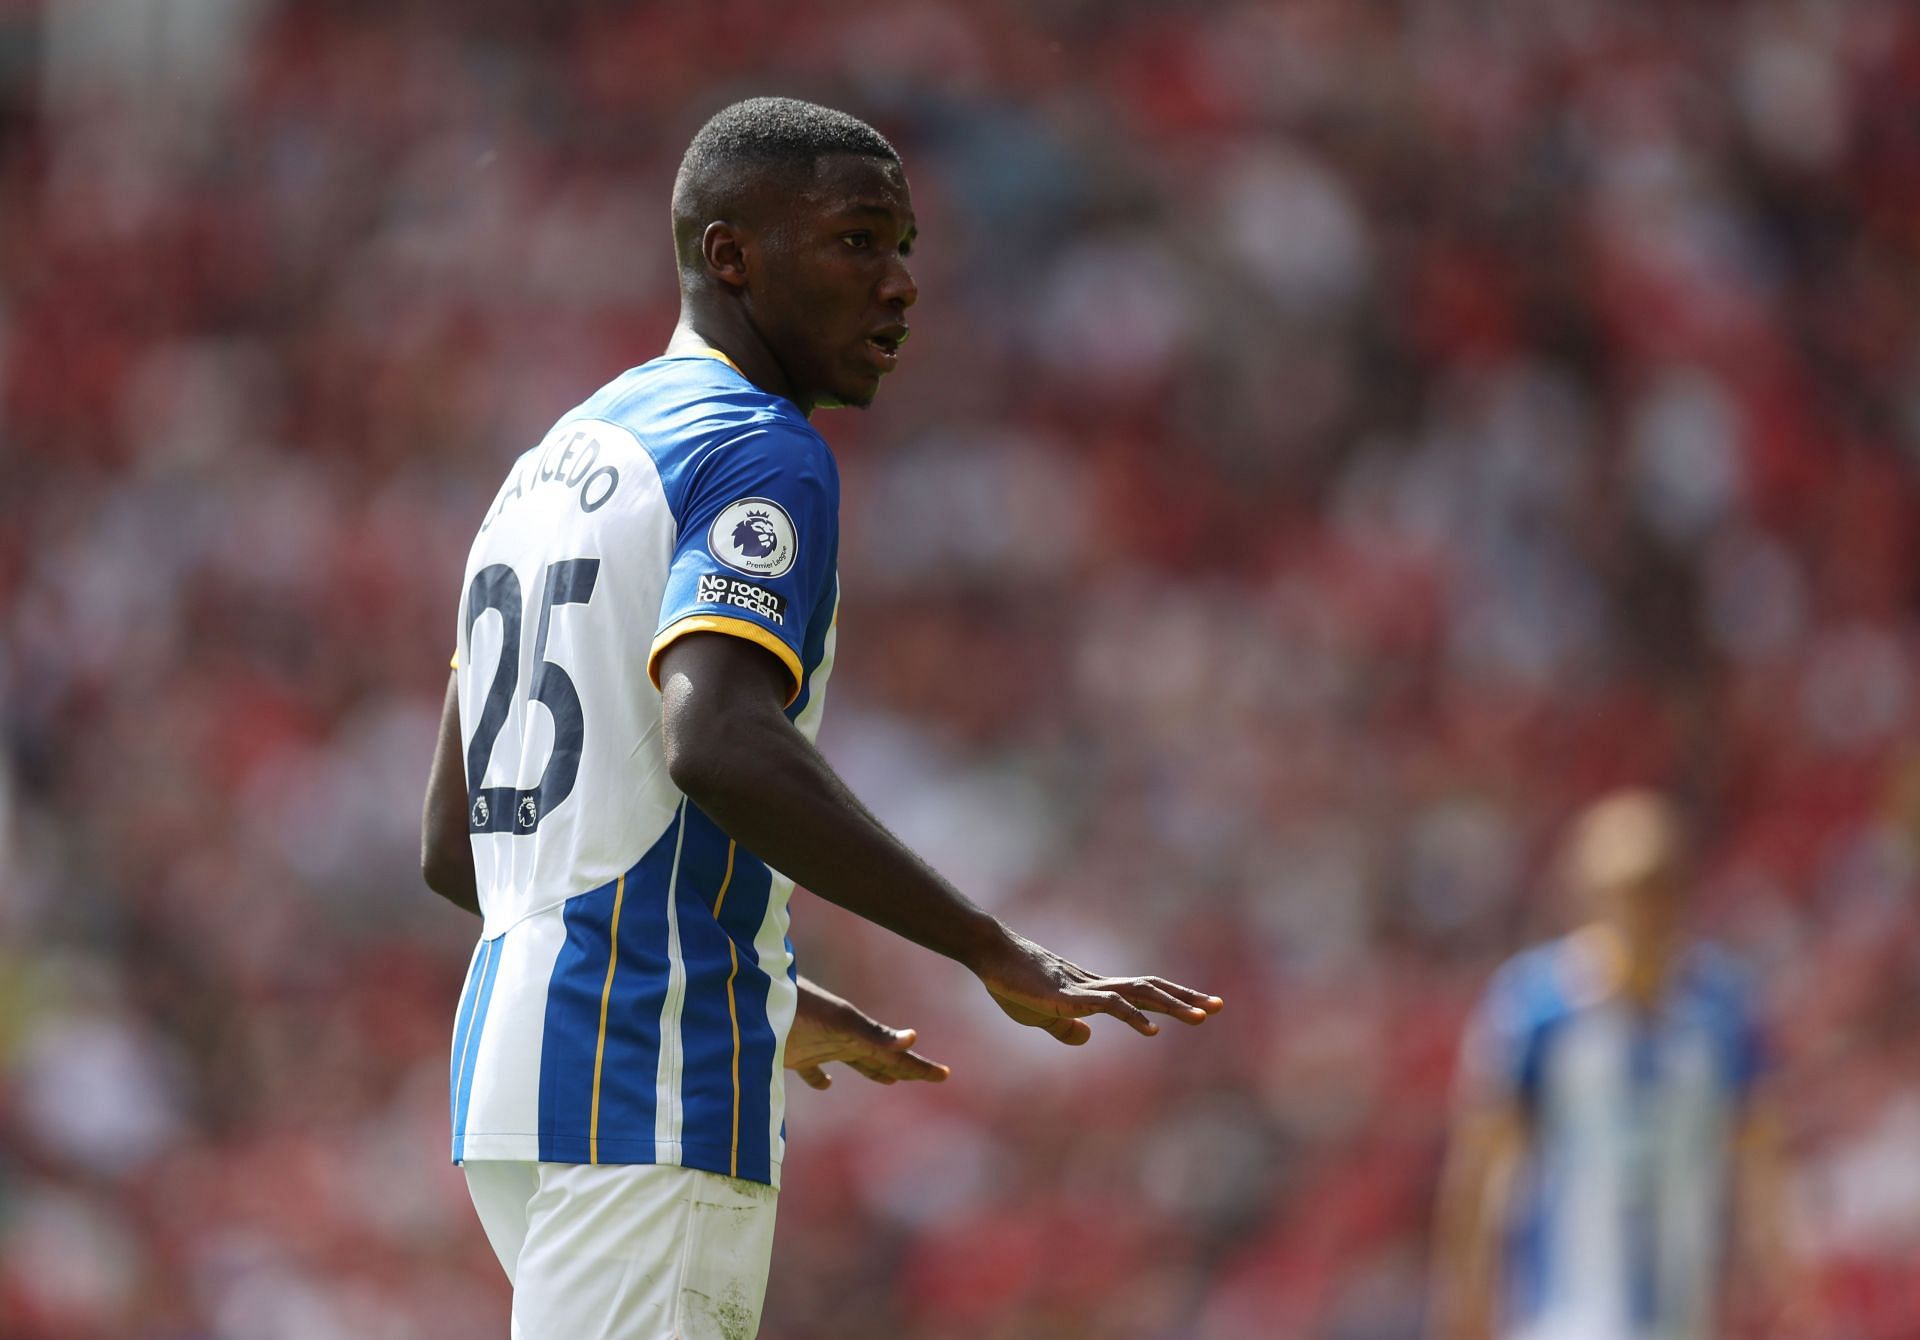 The midfielder has been a huge revelation at Brighton.